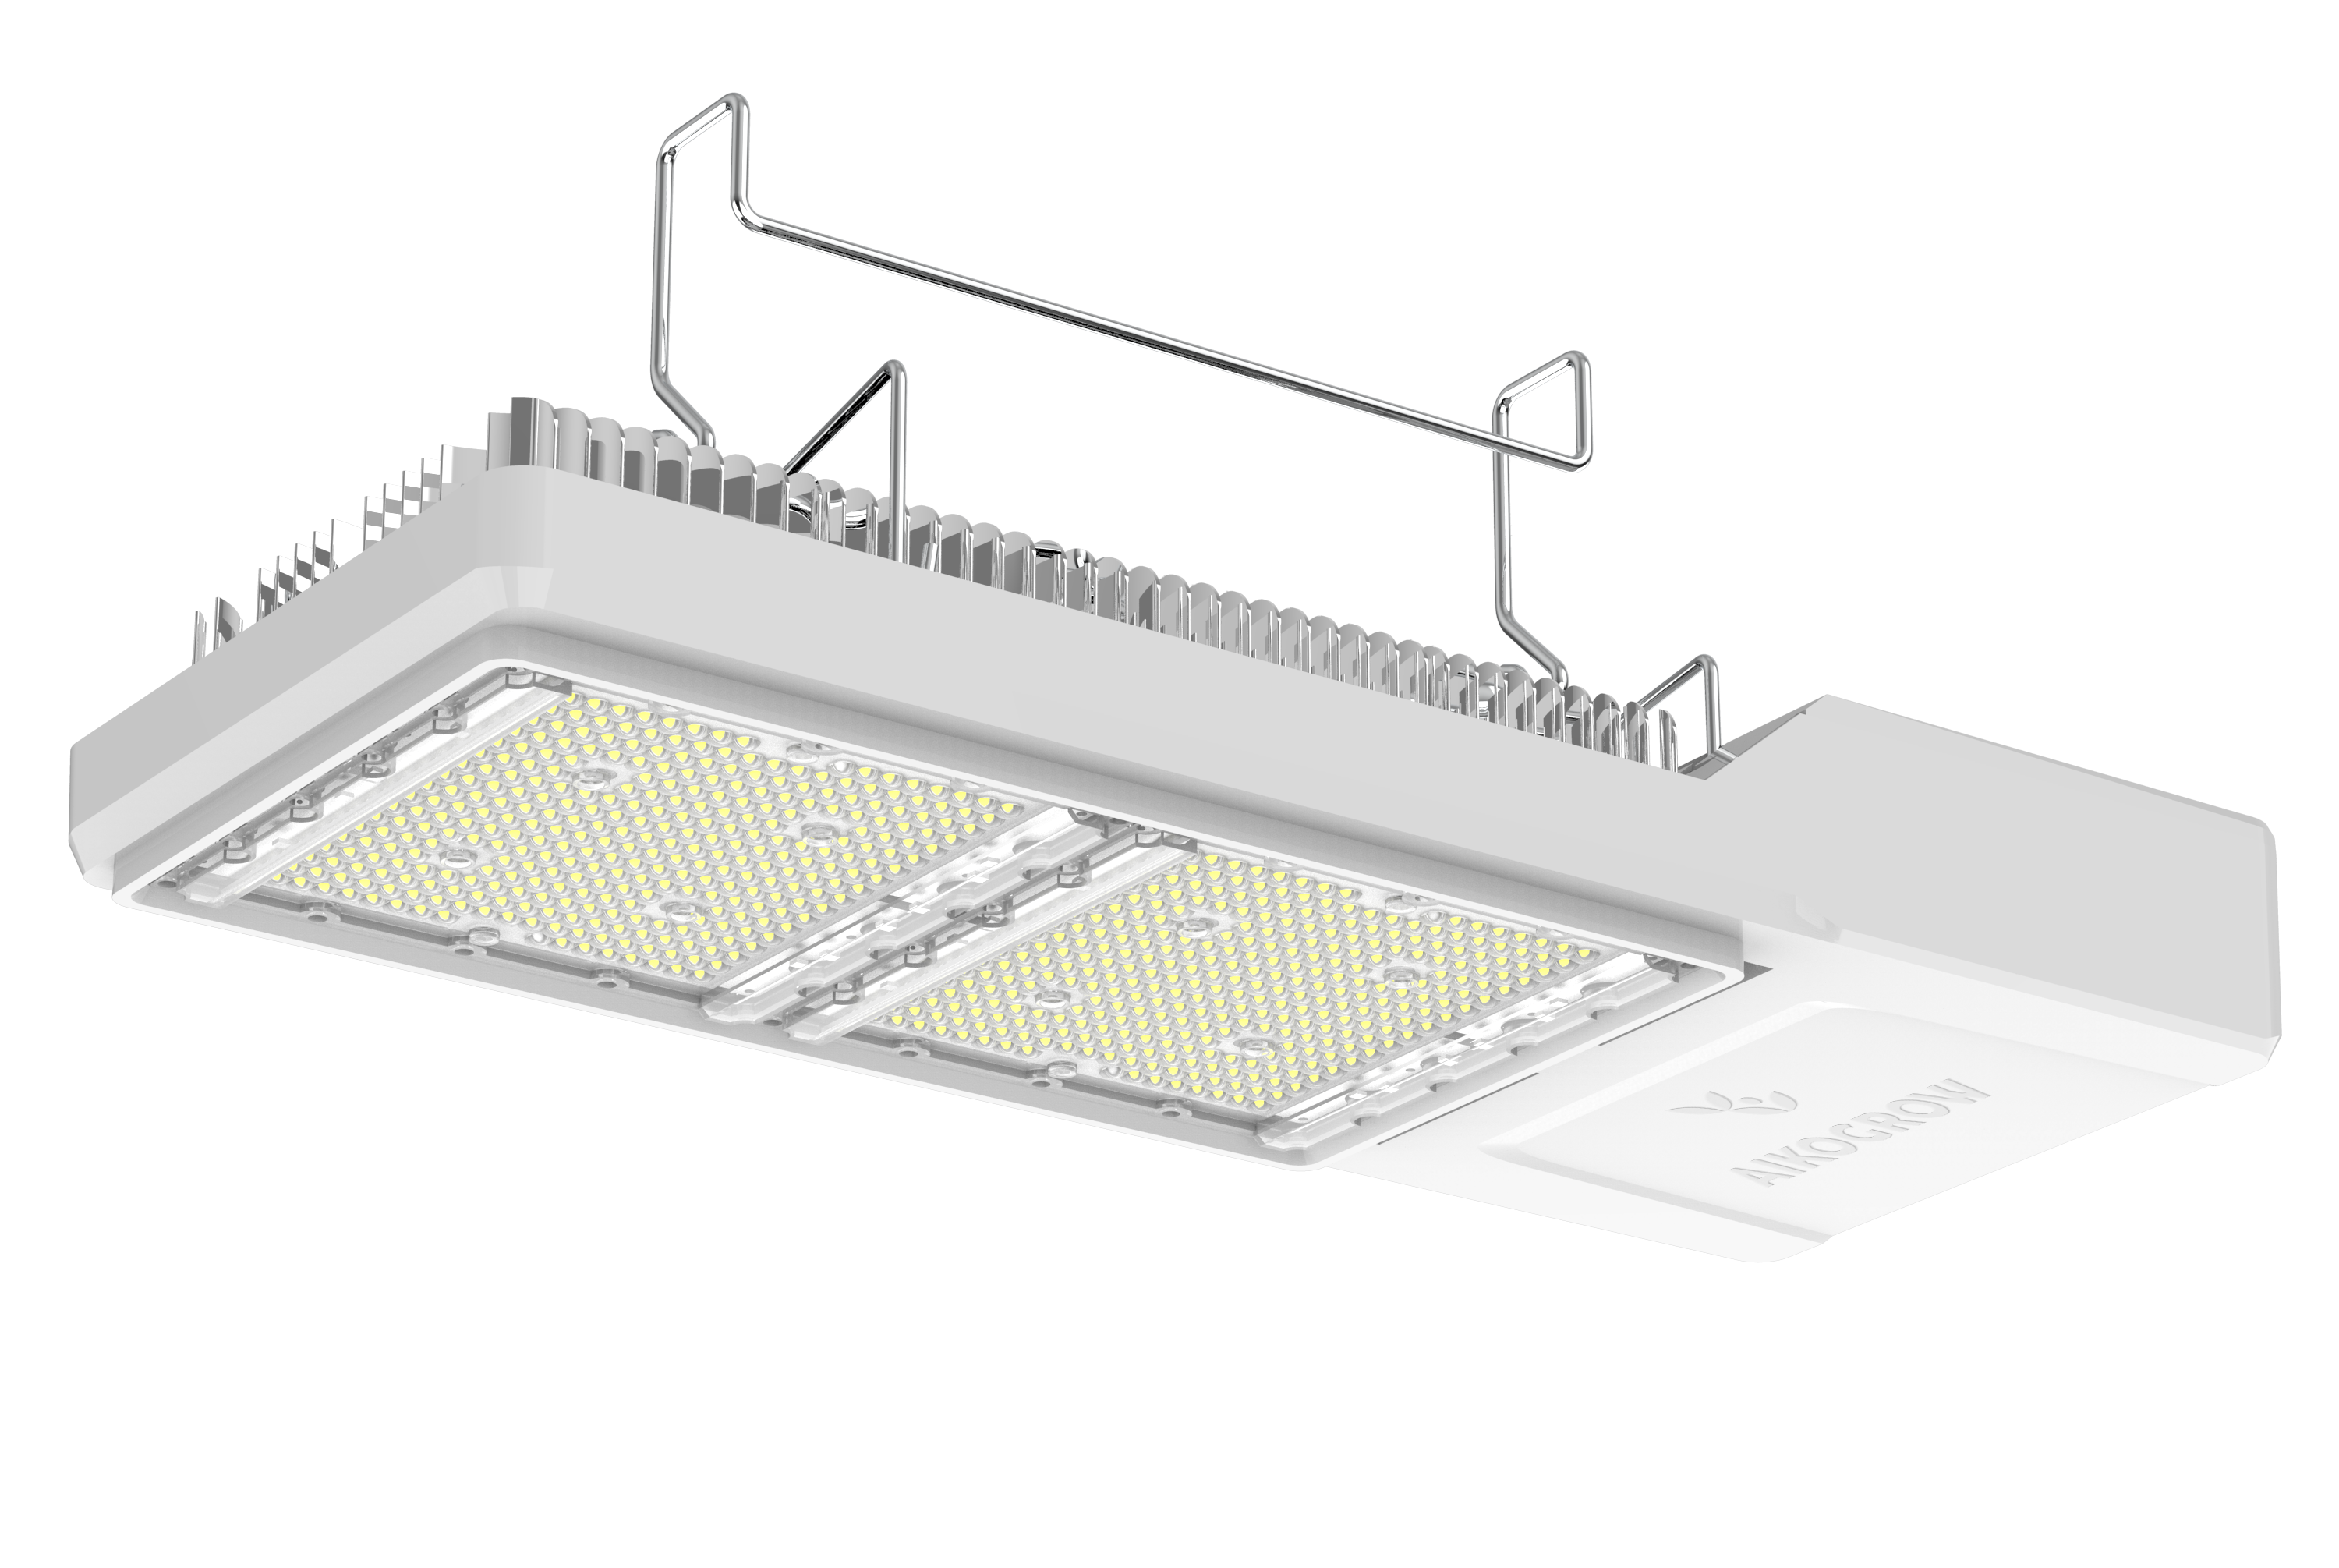 LED grow light 1:1 replacement for HPS fixture Featured Image